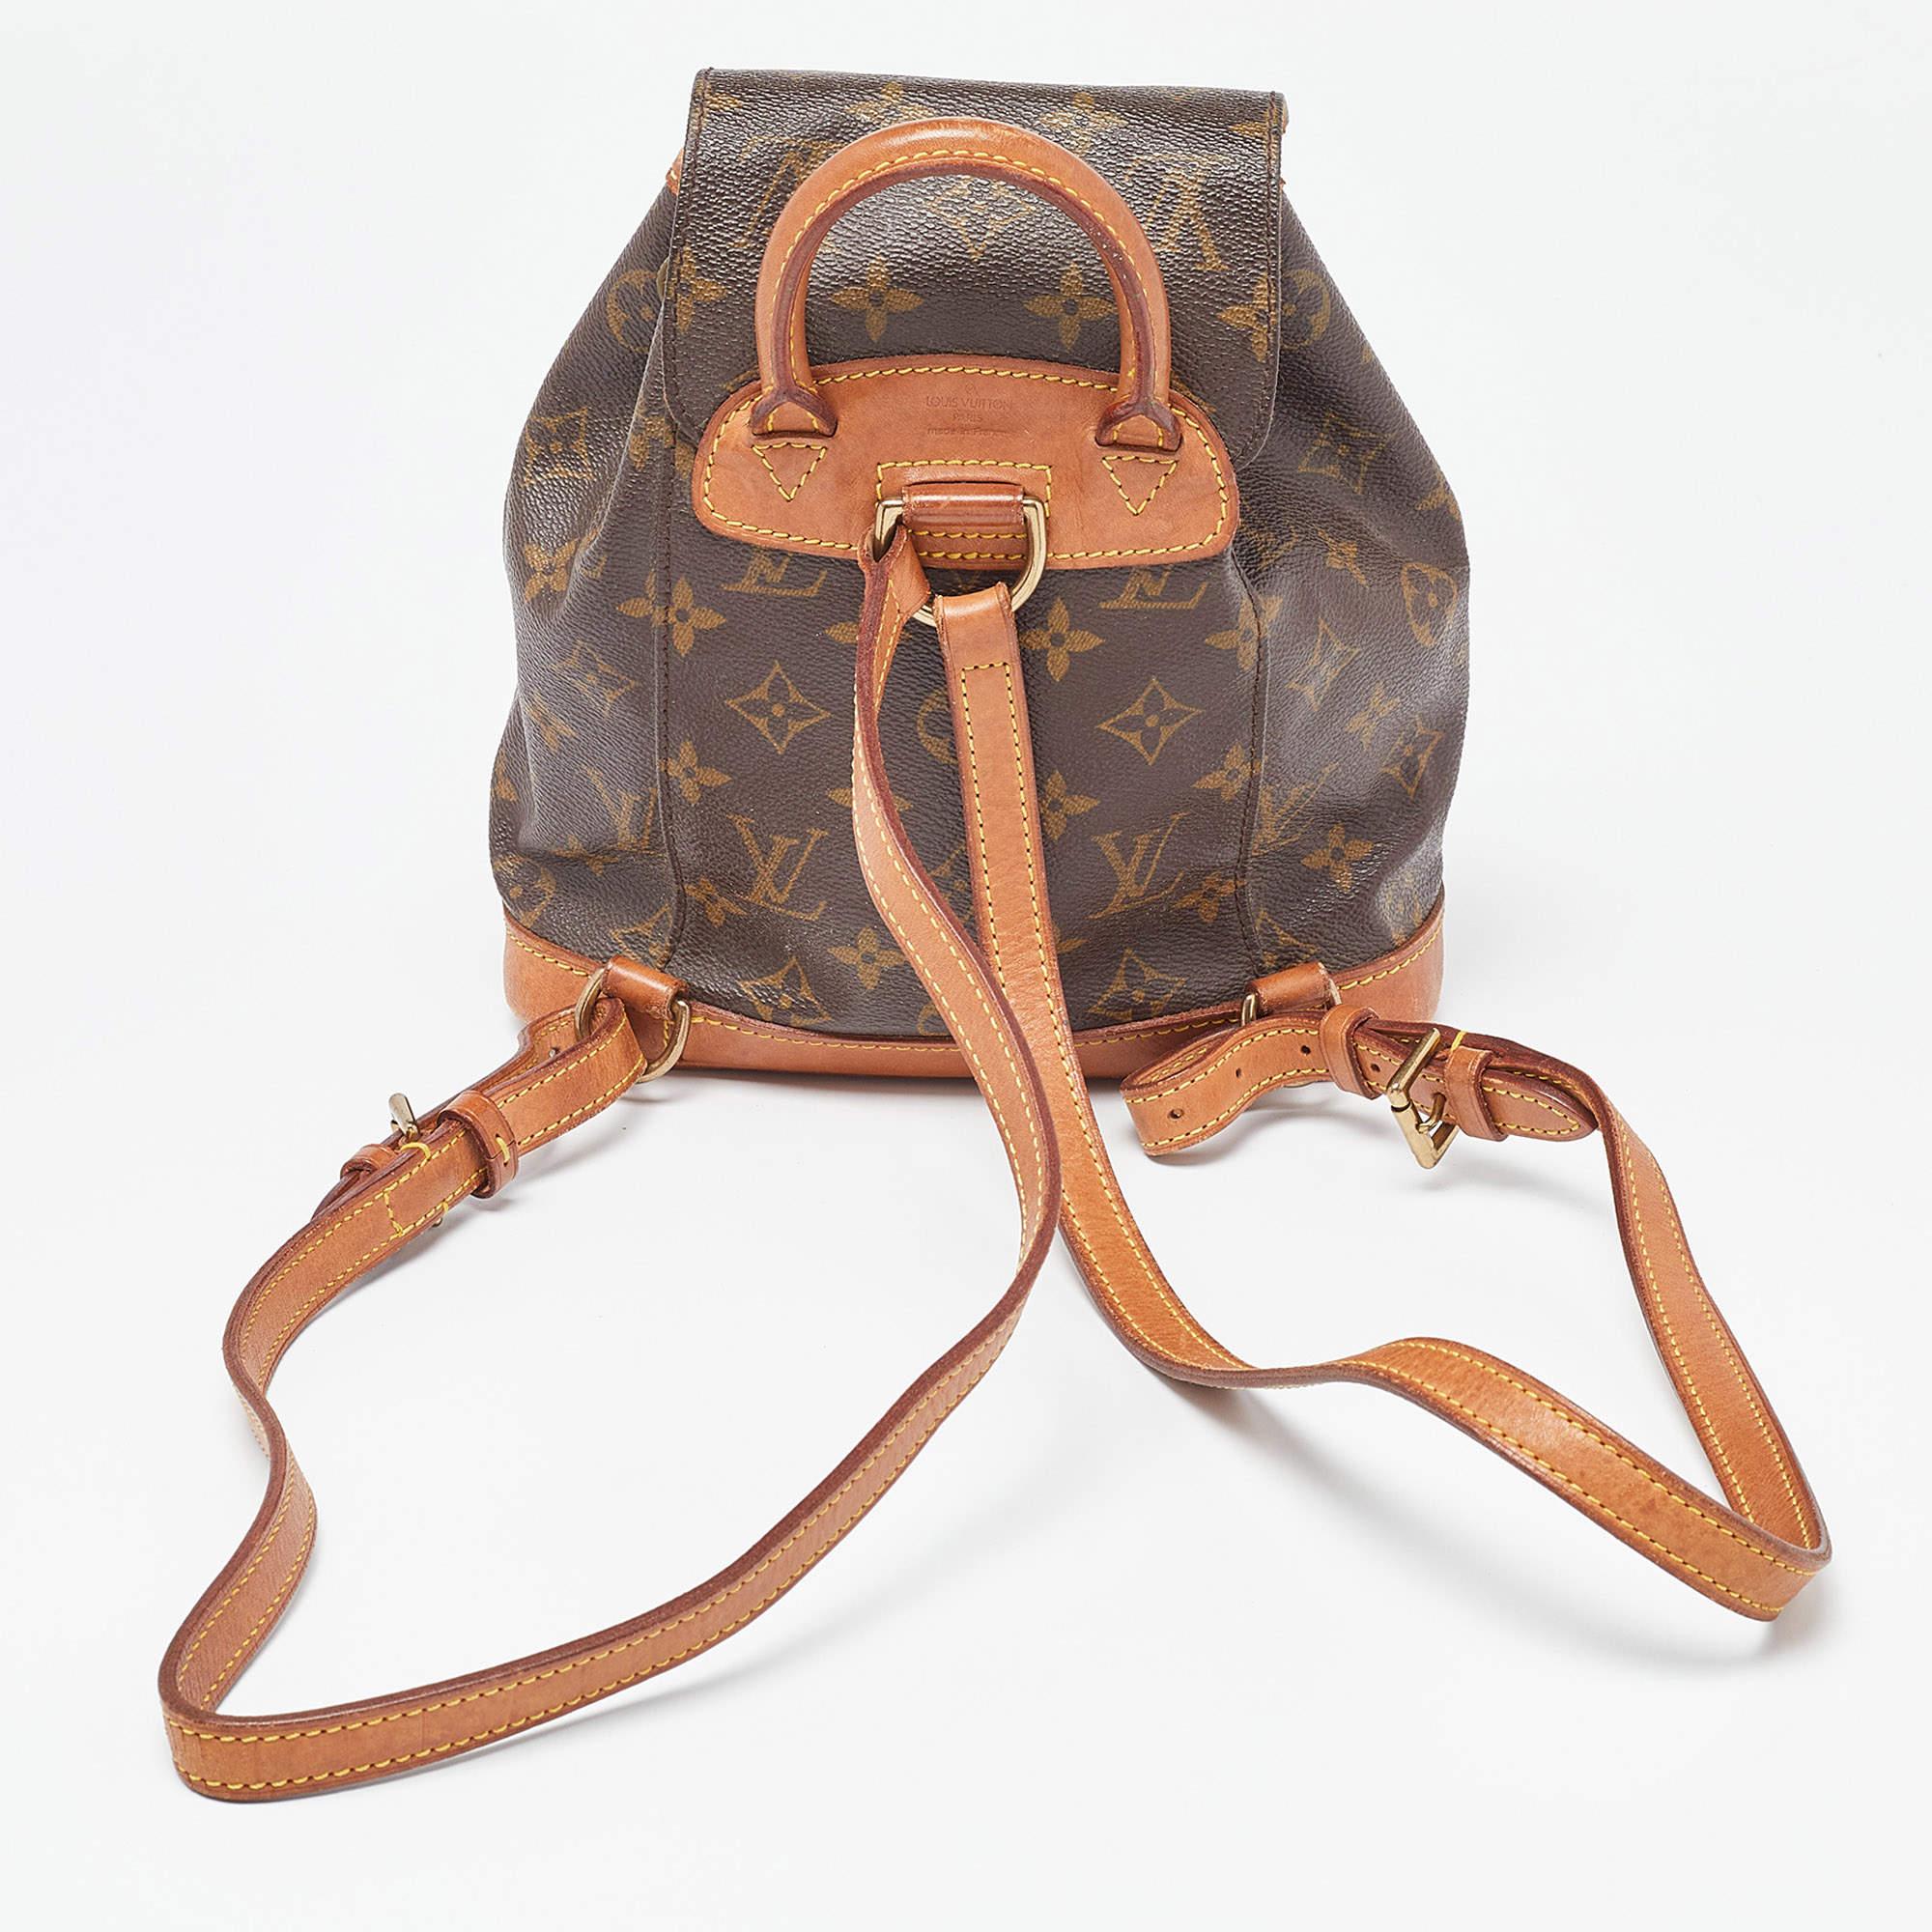 The Louis Vuitton mini Montsouris backpack combines function and fashion beautifully. It is crafted using Monogram canvas and leather, with a flap closure to secure the spacious interior. It is an everyday-friendly bag, perfect for college, work, or